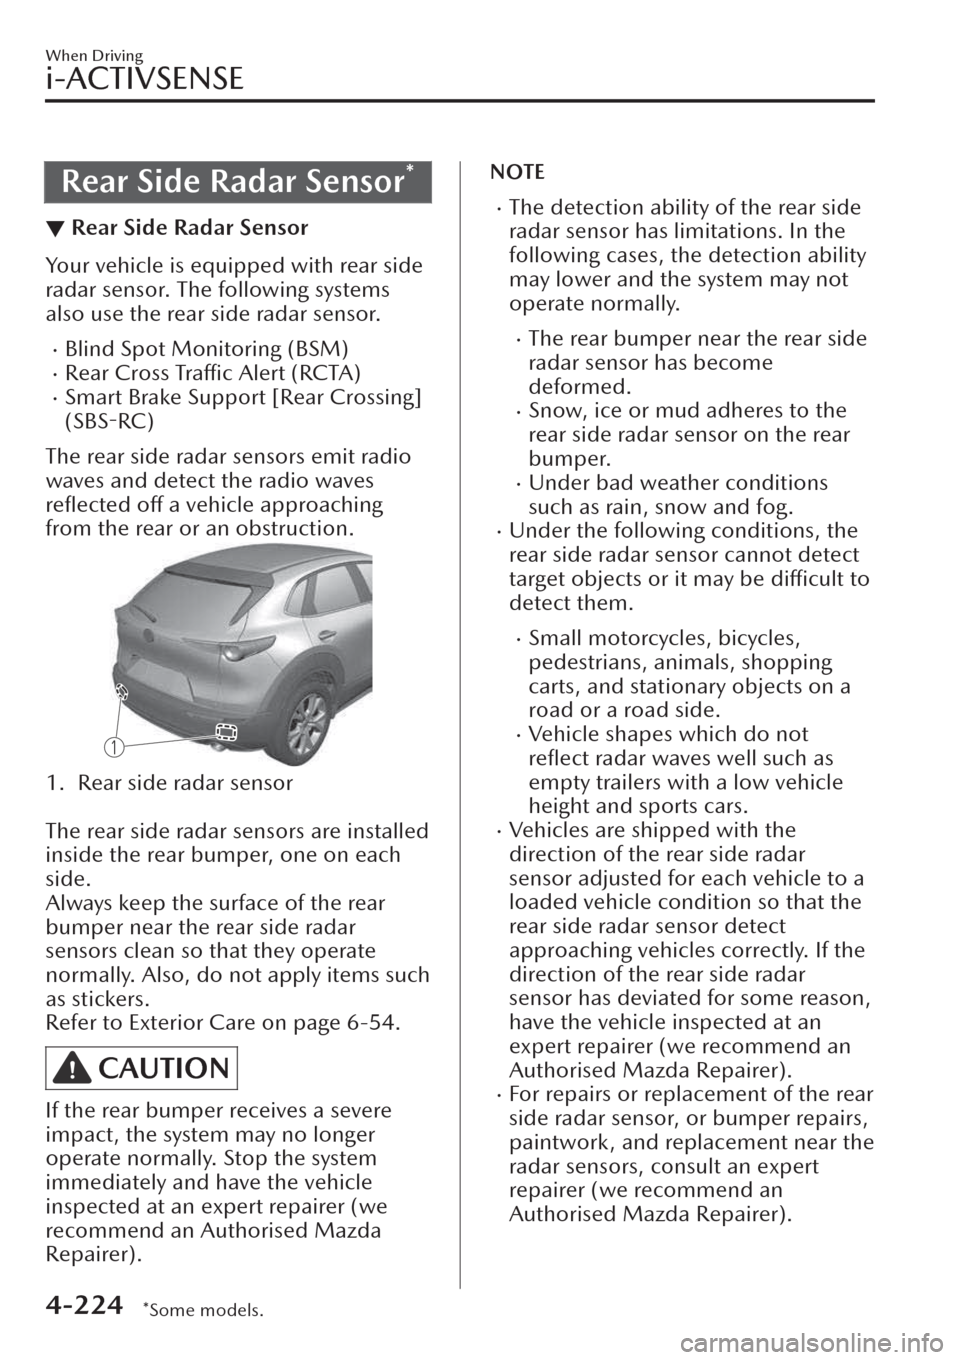 MAZDA MODEL CX-30 2019  Owners Manual (in English) Rear Side Radar Sensor*
▼Rear Side Radar Sensor
Your vehicle is equipped with rear side
radar sensor. The following systems
also use the rear side radar sensor.
�xBlind Spot Monitoring (BSM)�xRear C